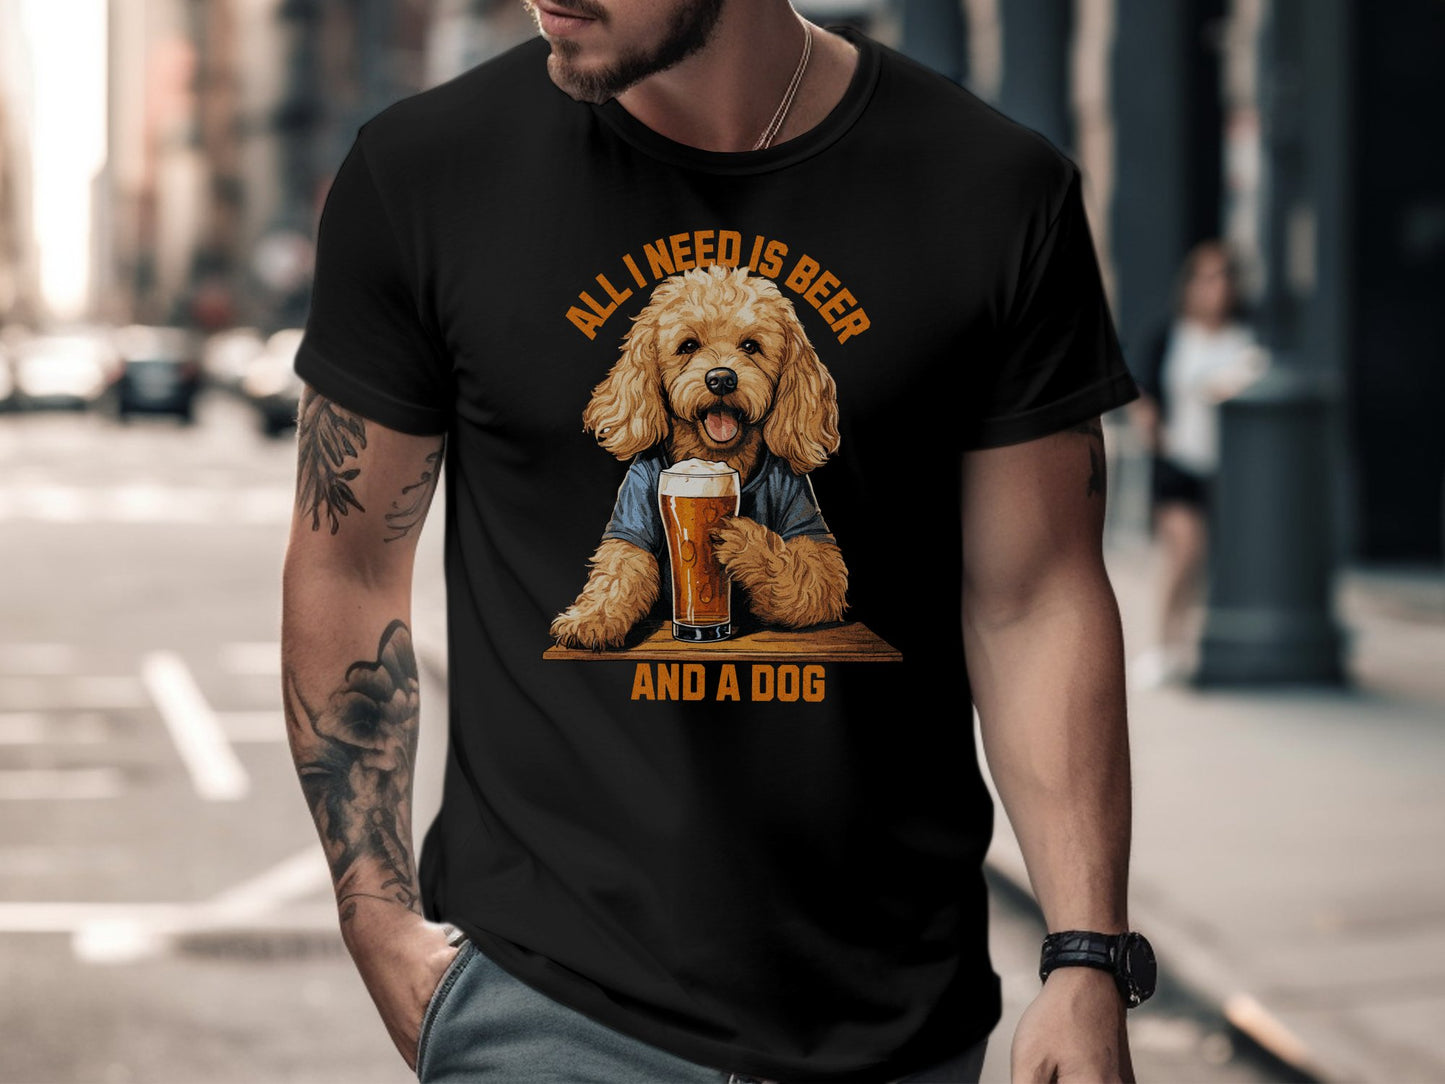 Beer and Dogs T-Shirt, Dog Lover, Beer Lover, Funny, Dog Shirt, Beer Shirt